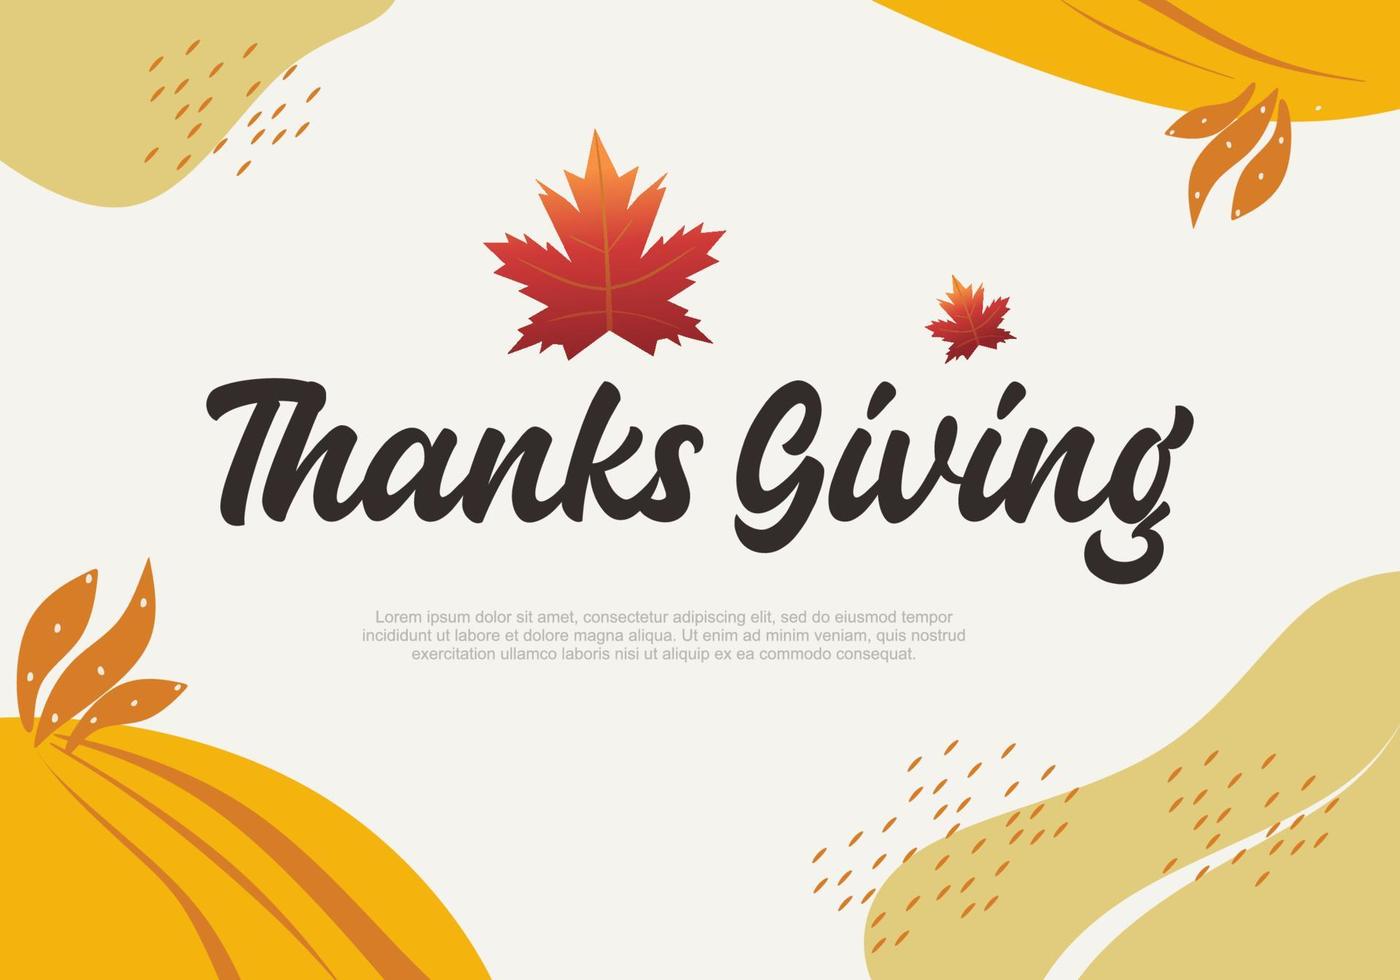 Happy thanks giving day background celebrated on November 24. vector